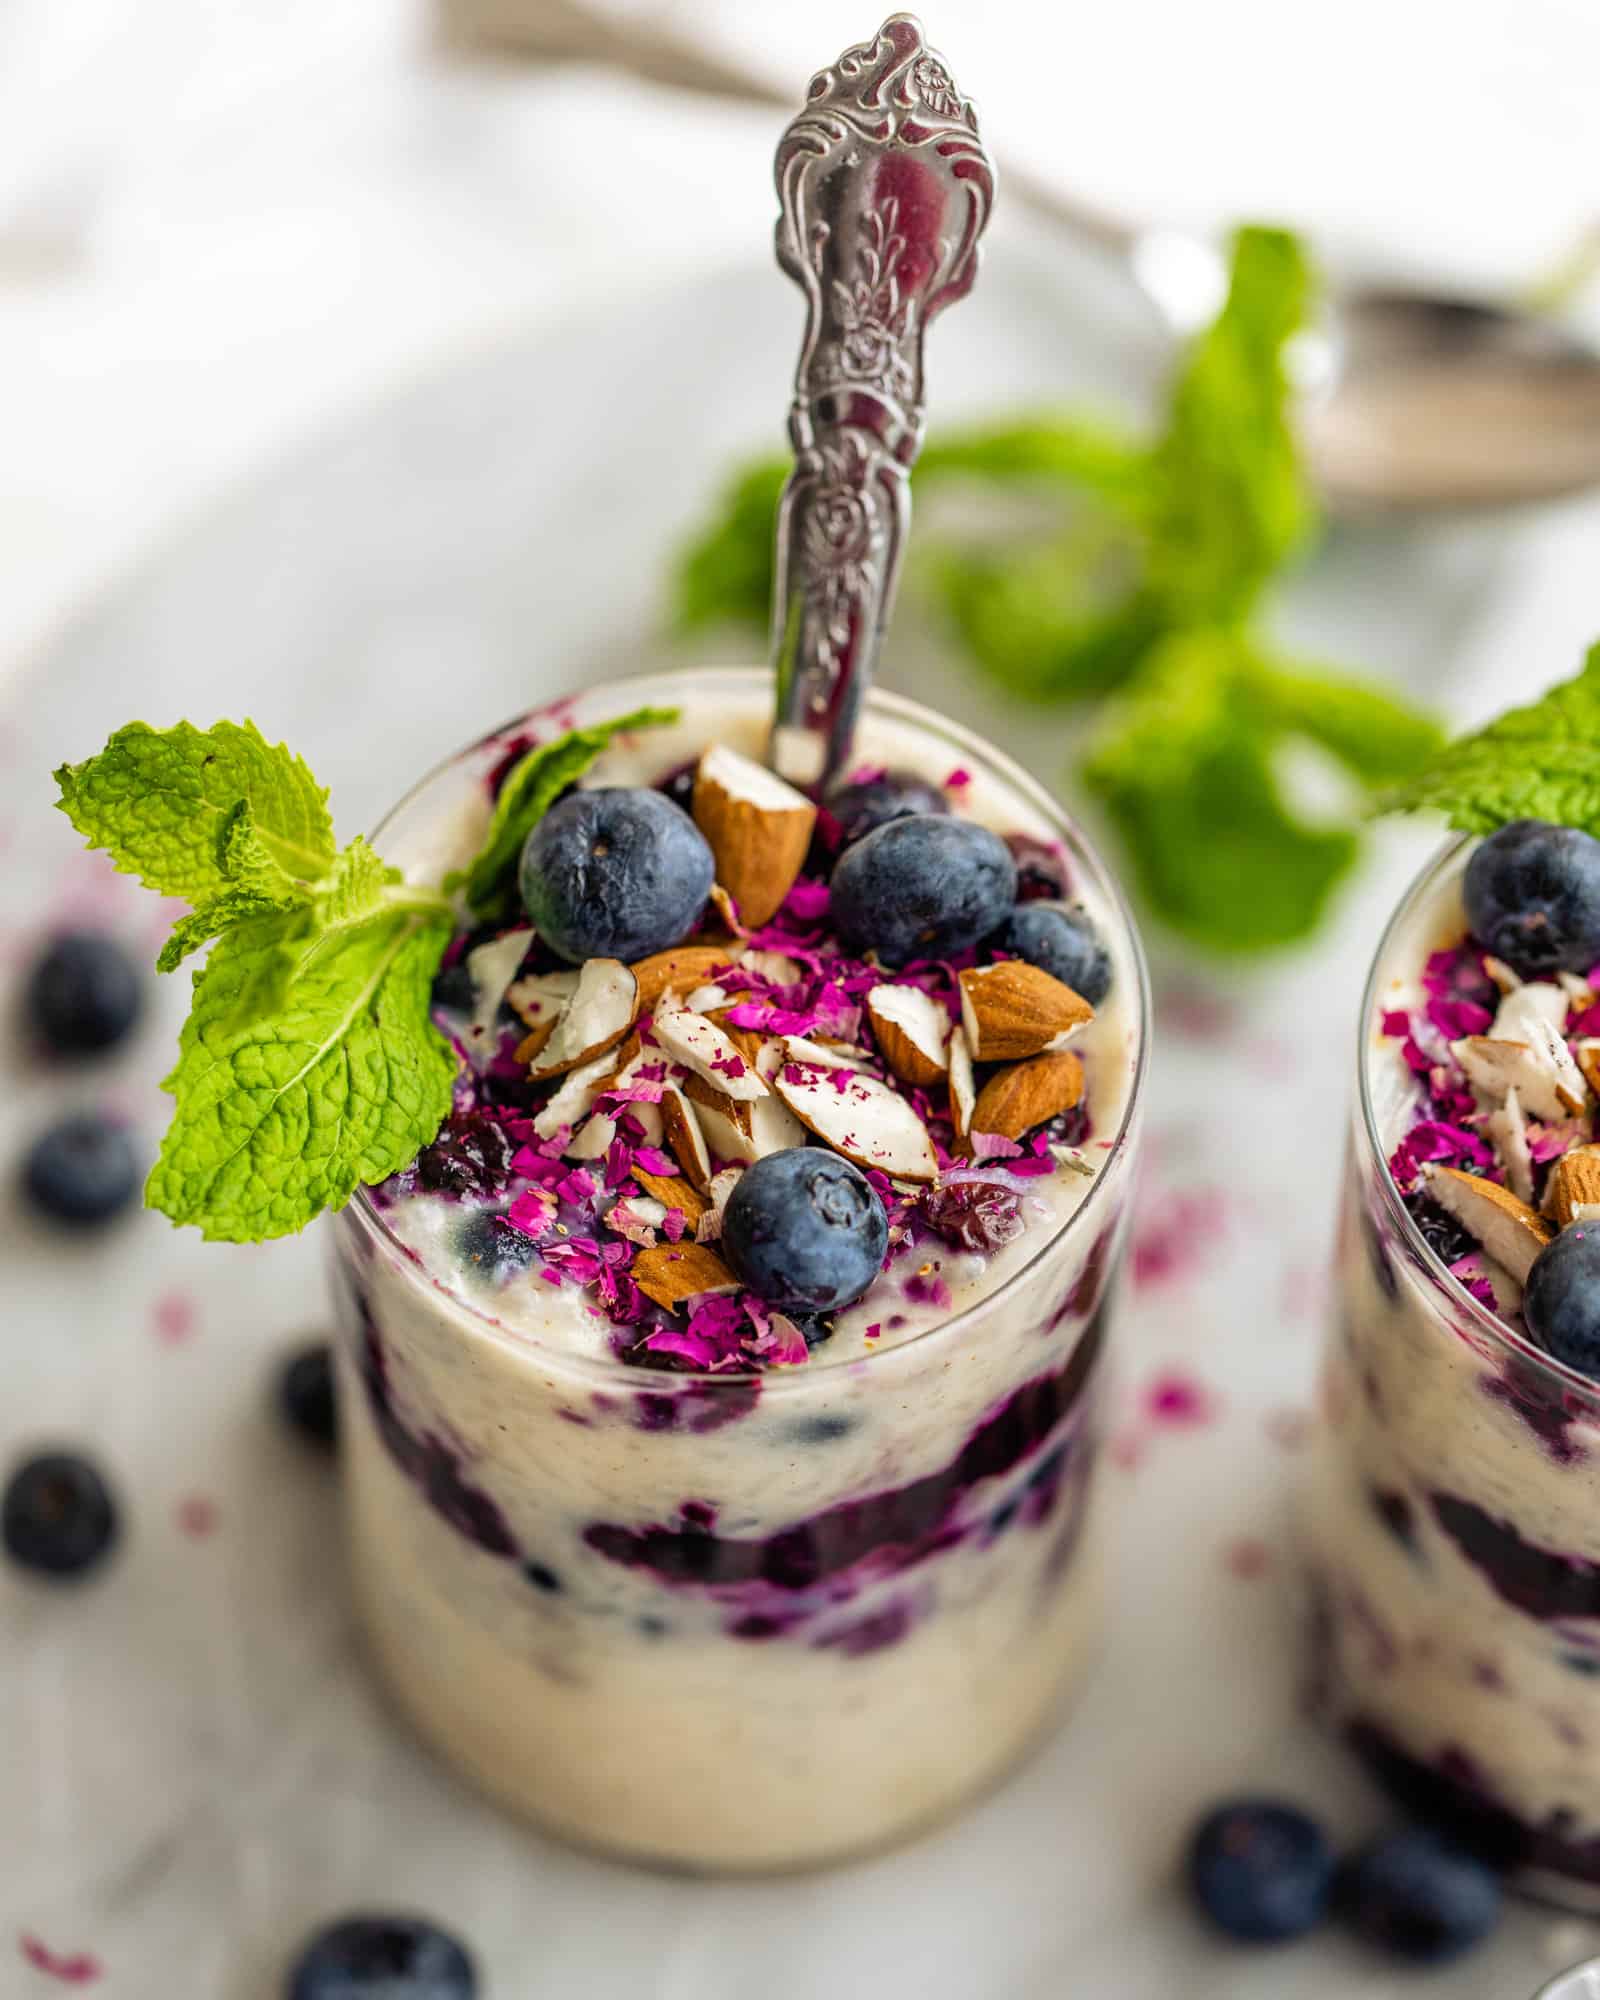 cups of rice pudding with almonds and blueberries on top